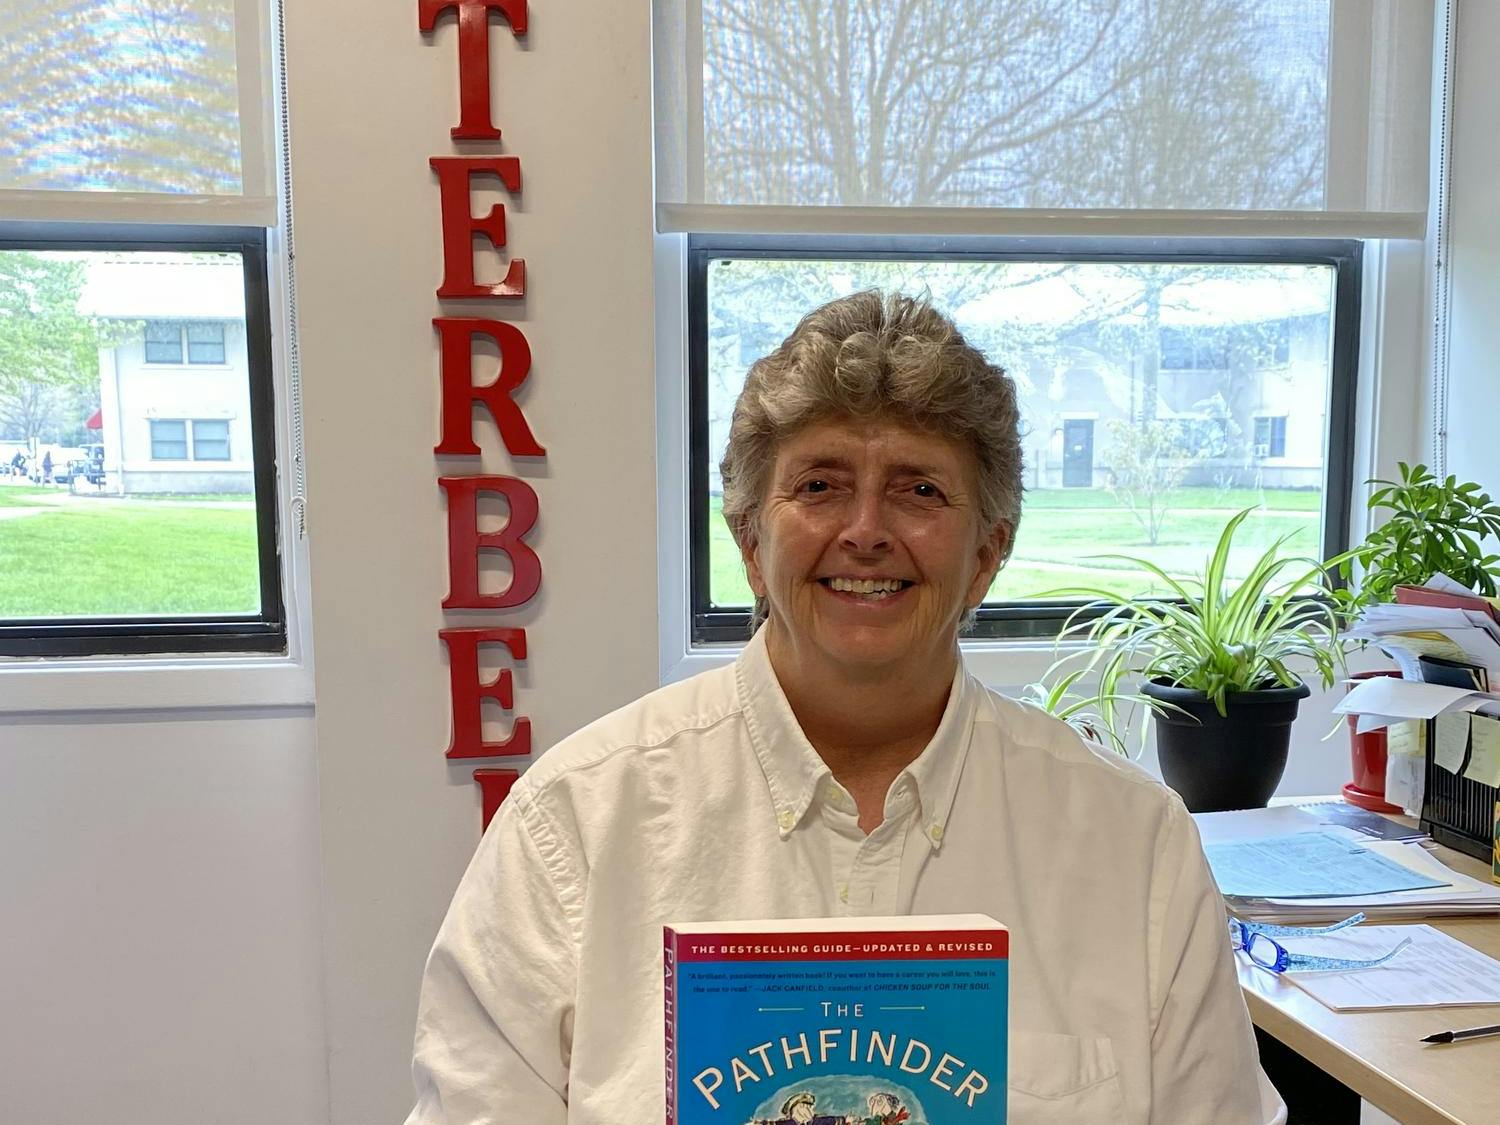 Dr. Walter with the Pathfinder Book